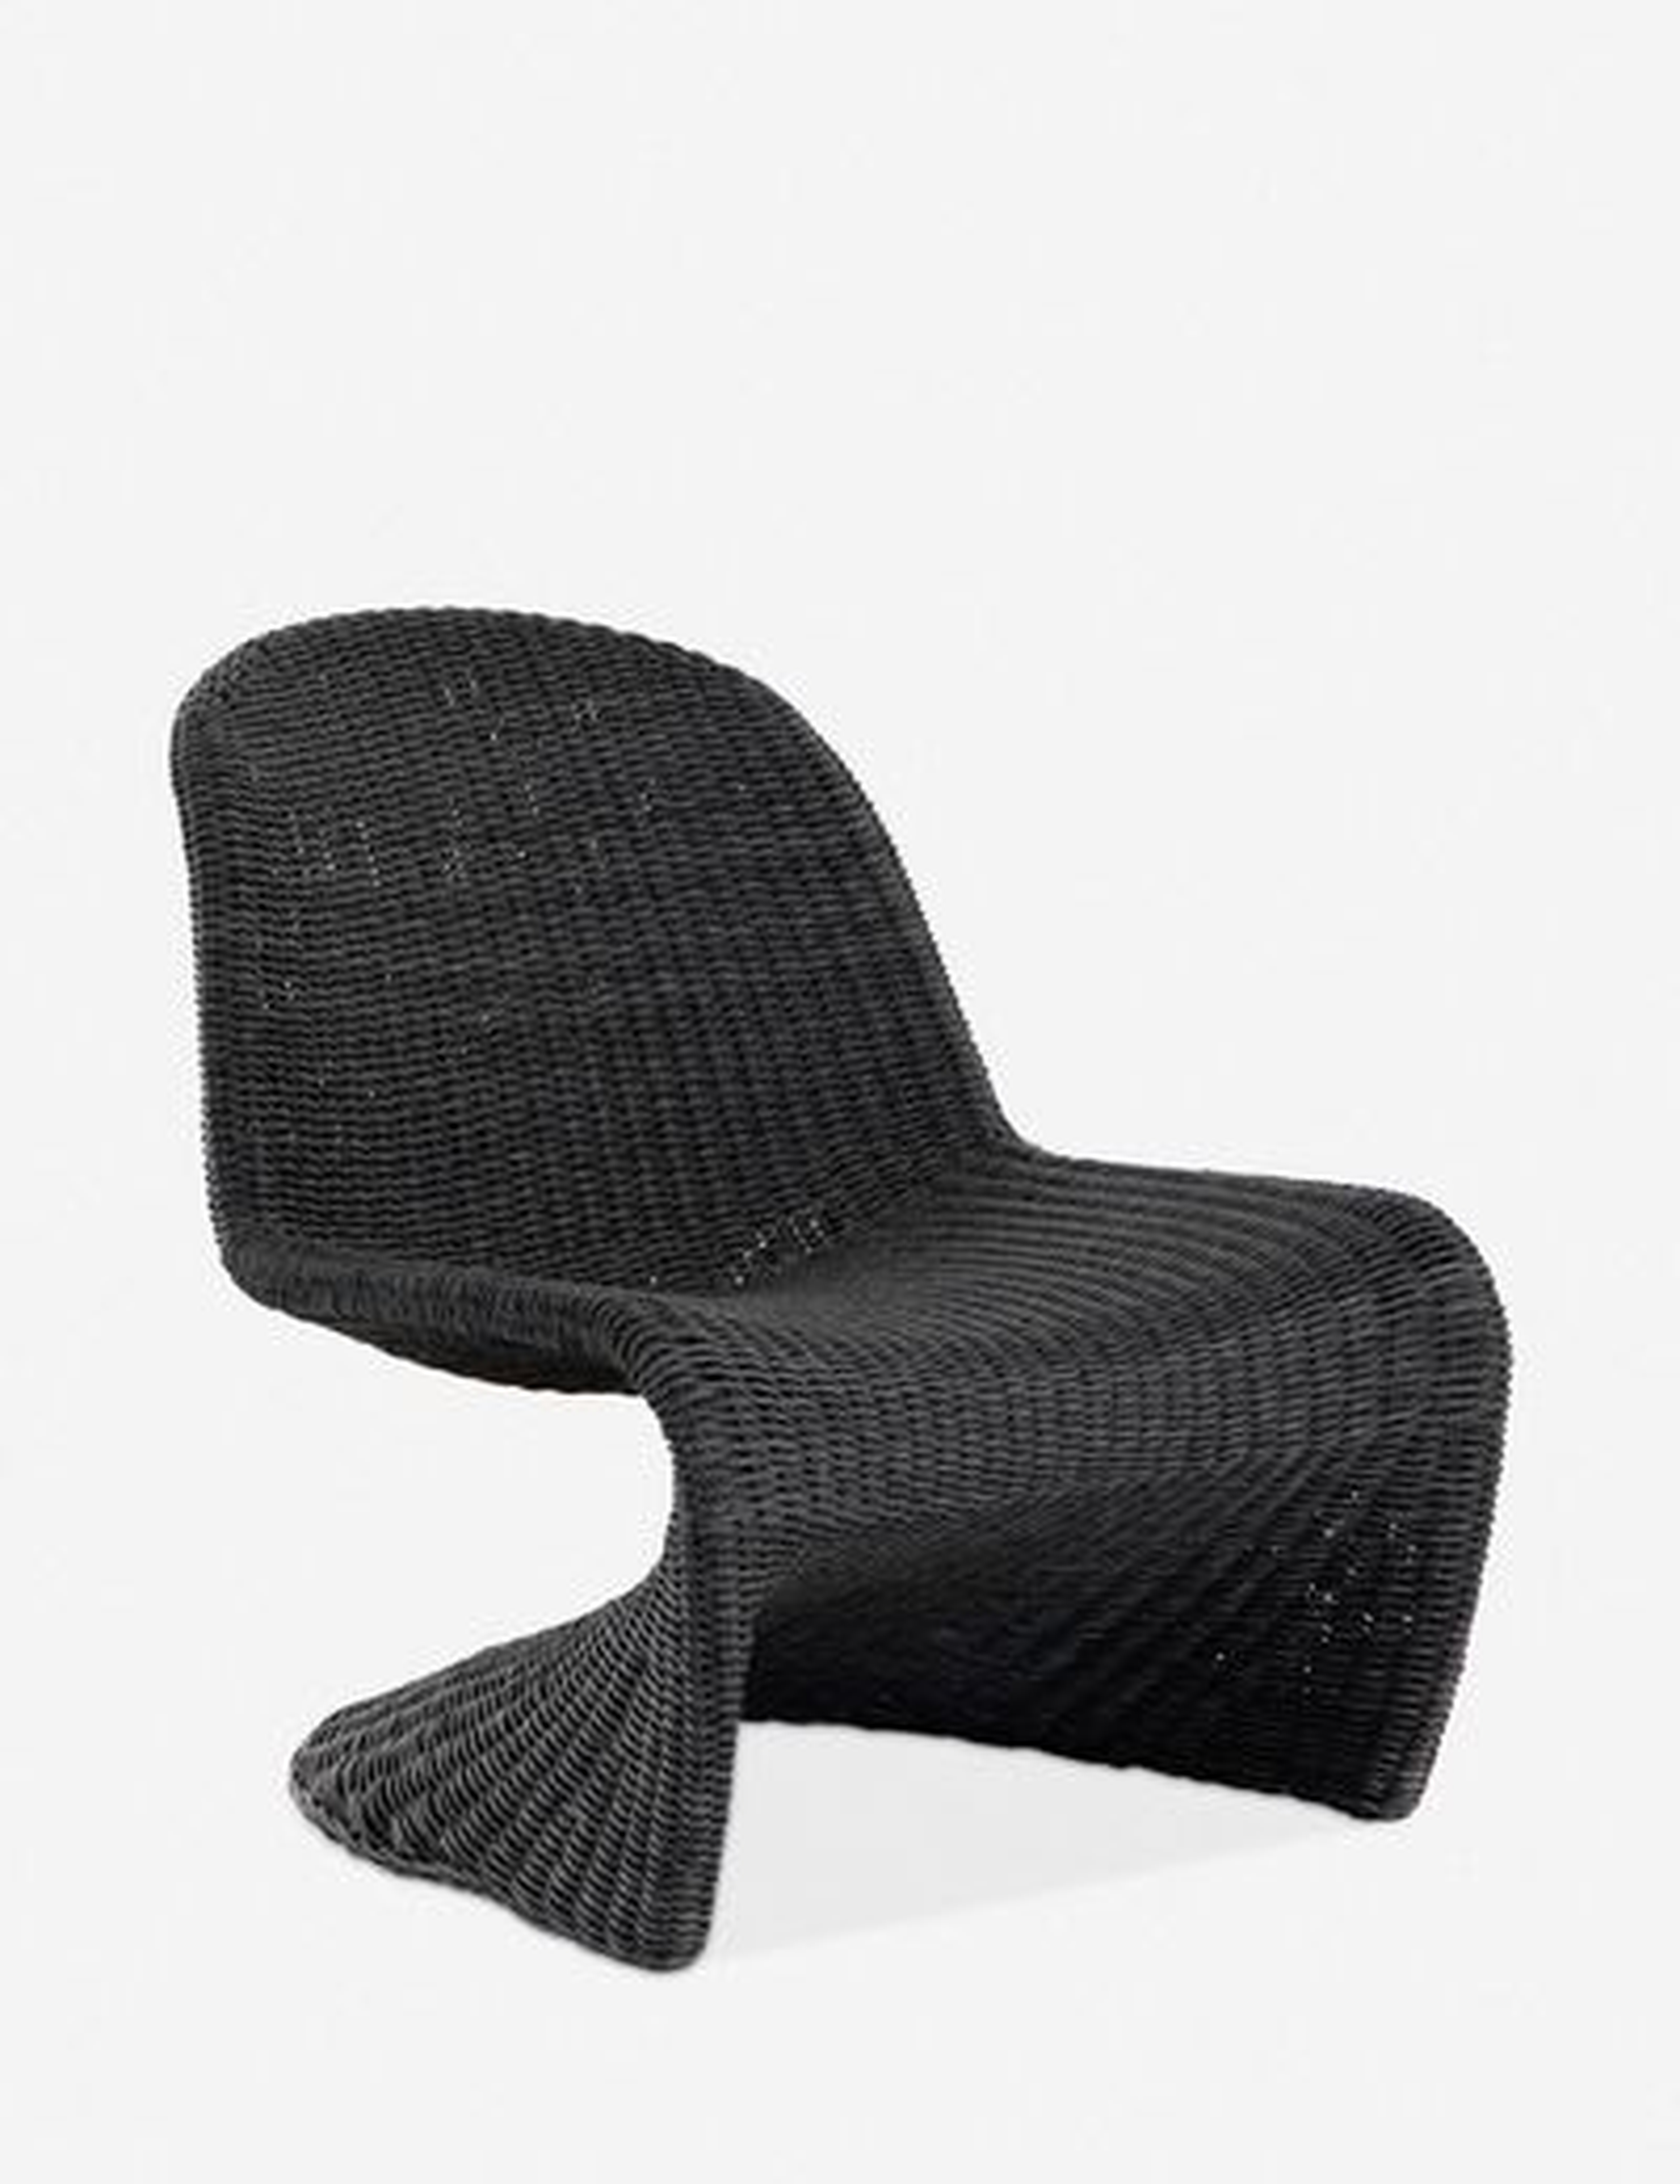 MANILA INDOOR / OUTDOOR ACCENT CHAIR, VINTAGE COAL - Lulu and Georgia